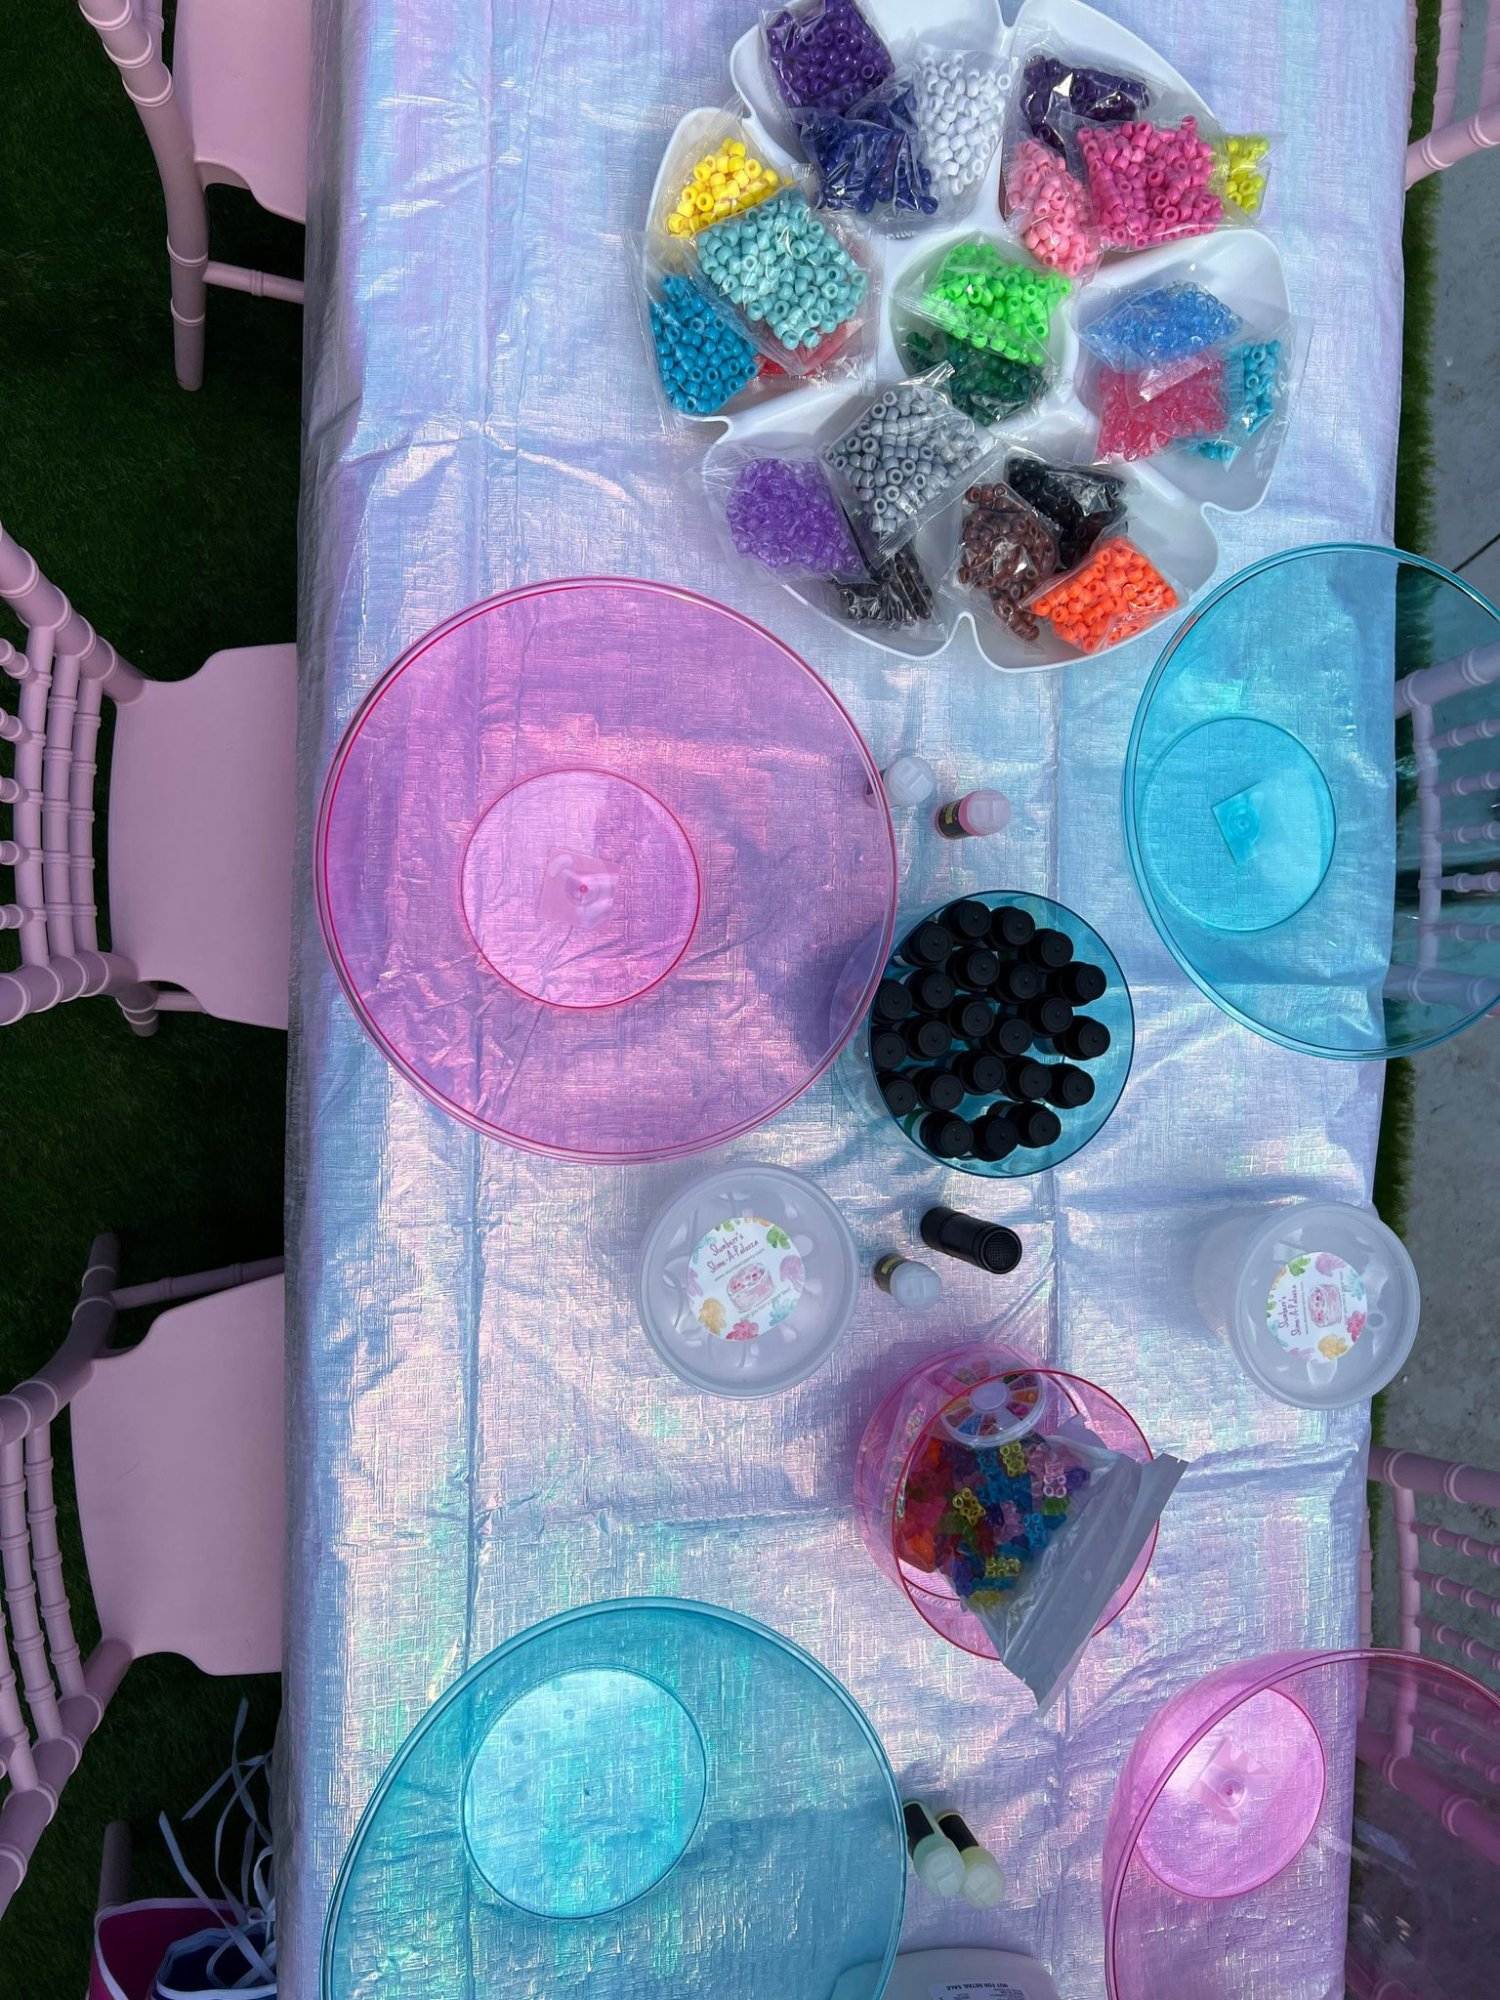 A party table set up with pink and blue plates and bowls.